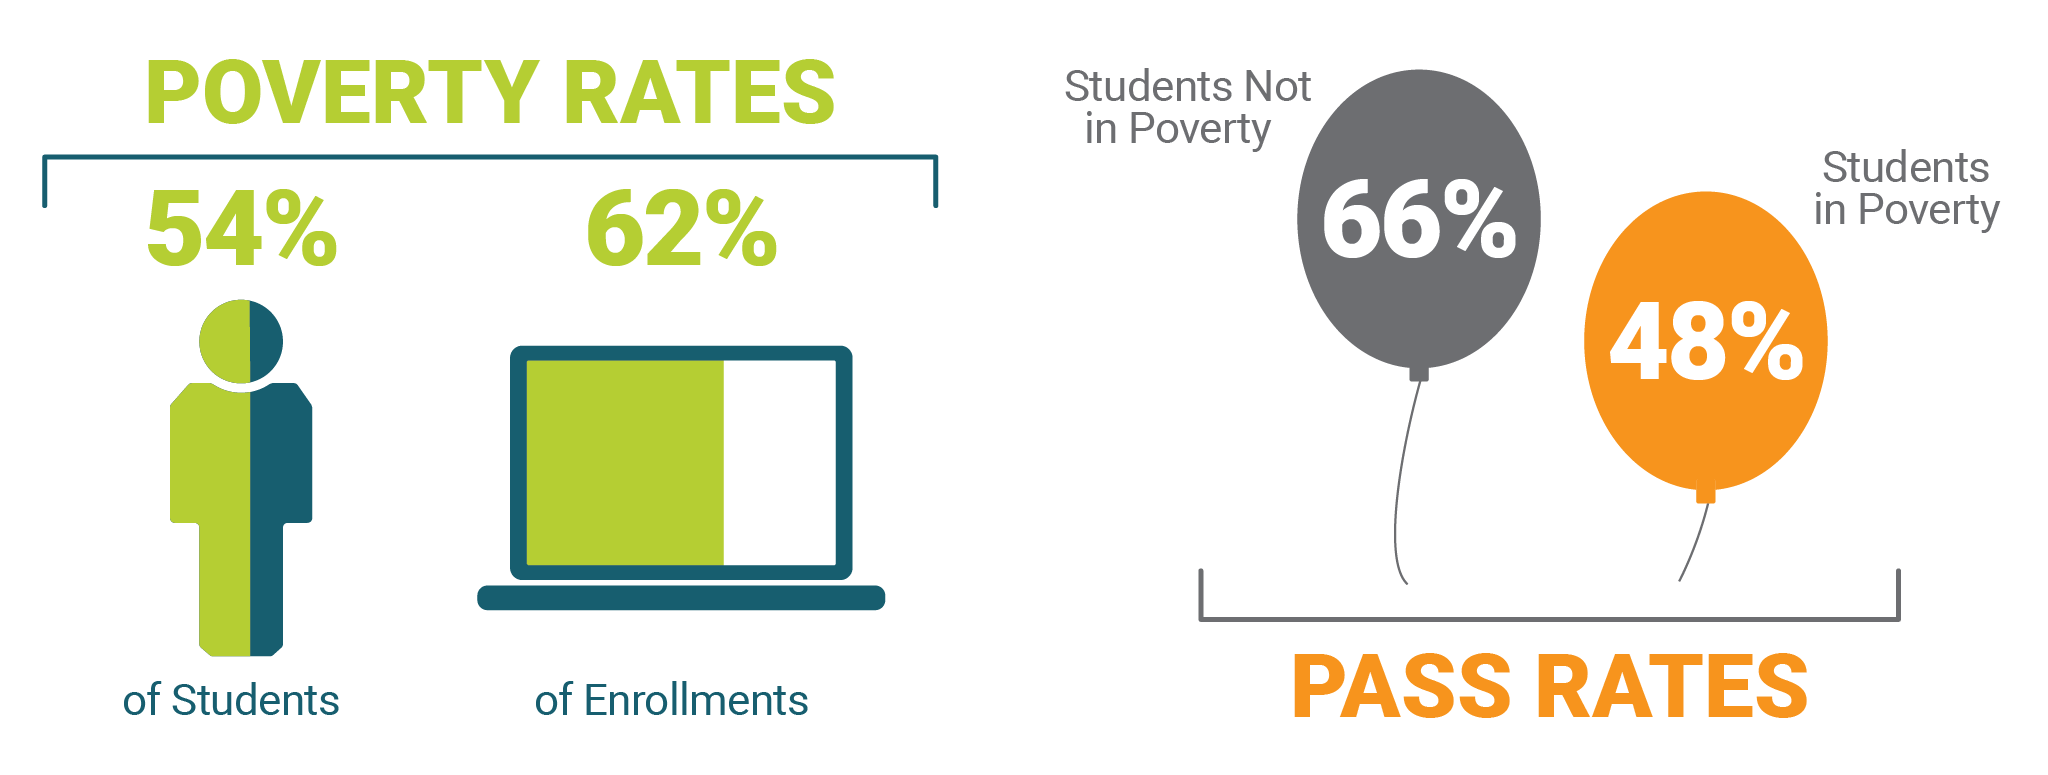 Students in poverty account for 54% of virtual students and 62% of virtual enrollments. Students in poverty have a 48 percent pass rate while students not in poverty had a 66 percent pass rate.